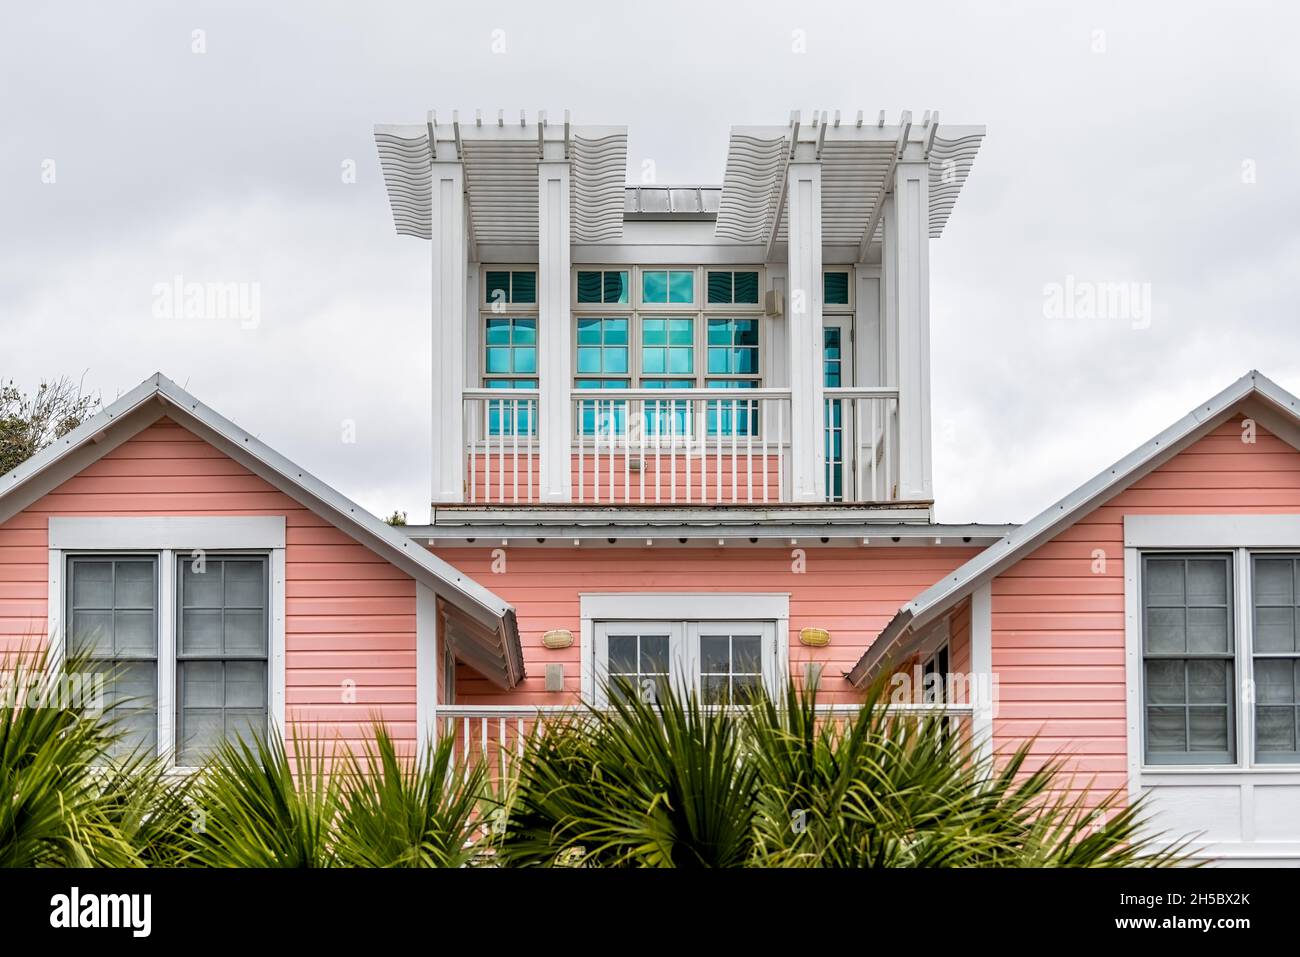 Wooden house tower new urbanism pastel pink architecture design by beach ocean in Seaside, Florida view on cloudy day Stock Photo